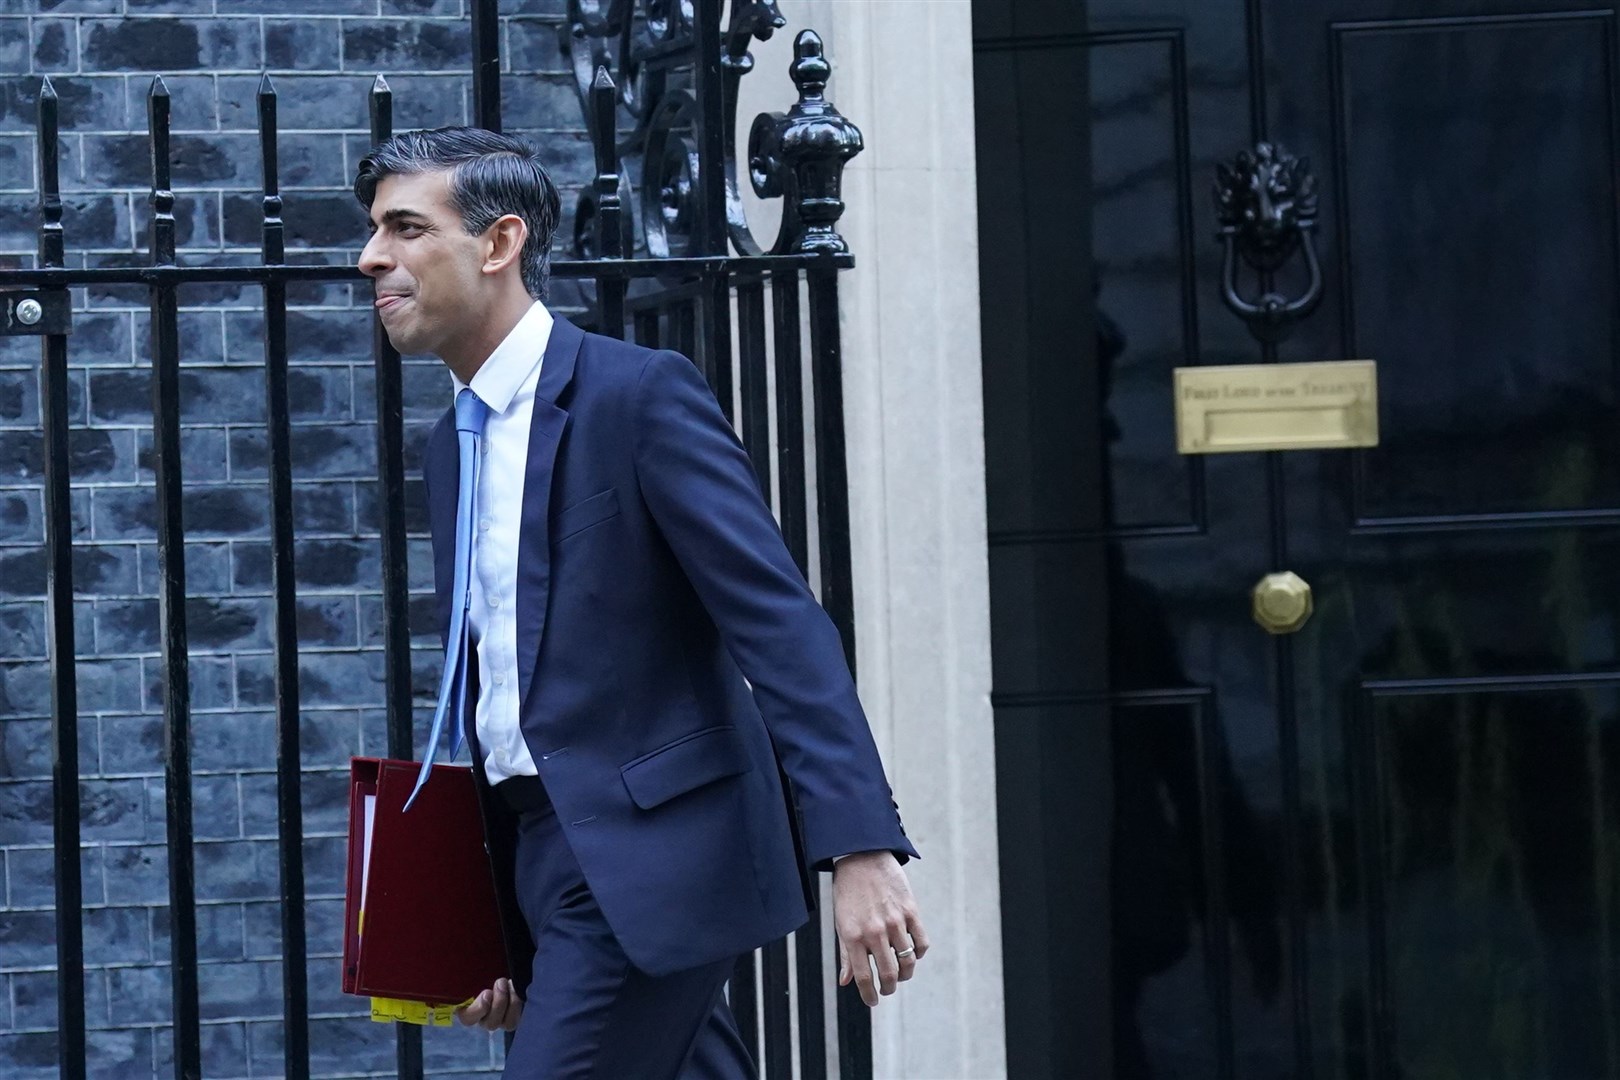 Rishi Sunak has announced that blanket legislation to exonerate subpostmasters convicted in England and Wales will be introduced within weeks (Stefan Rousseau/PA)